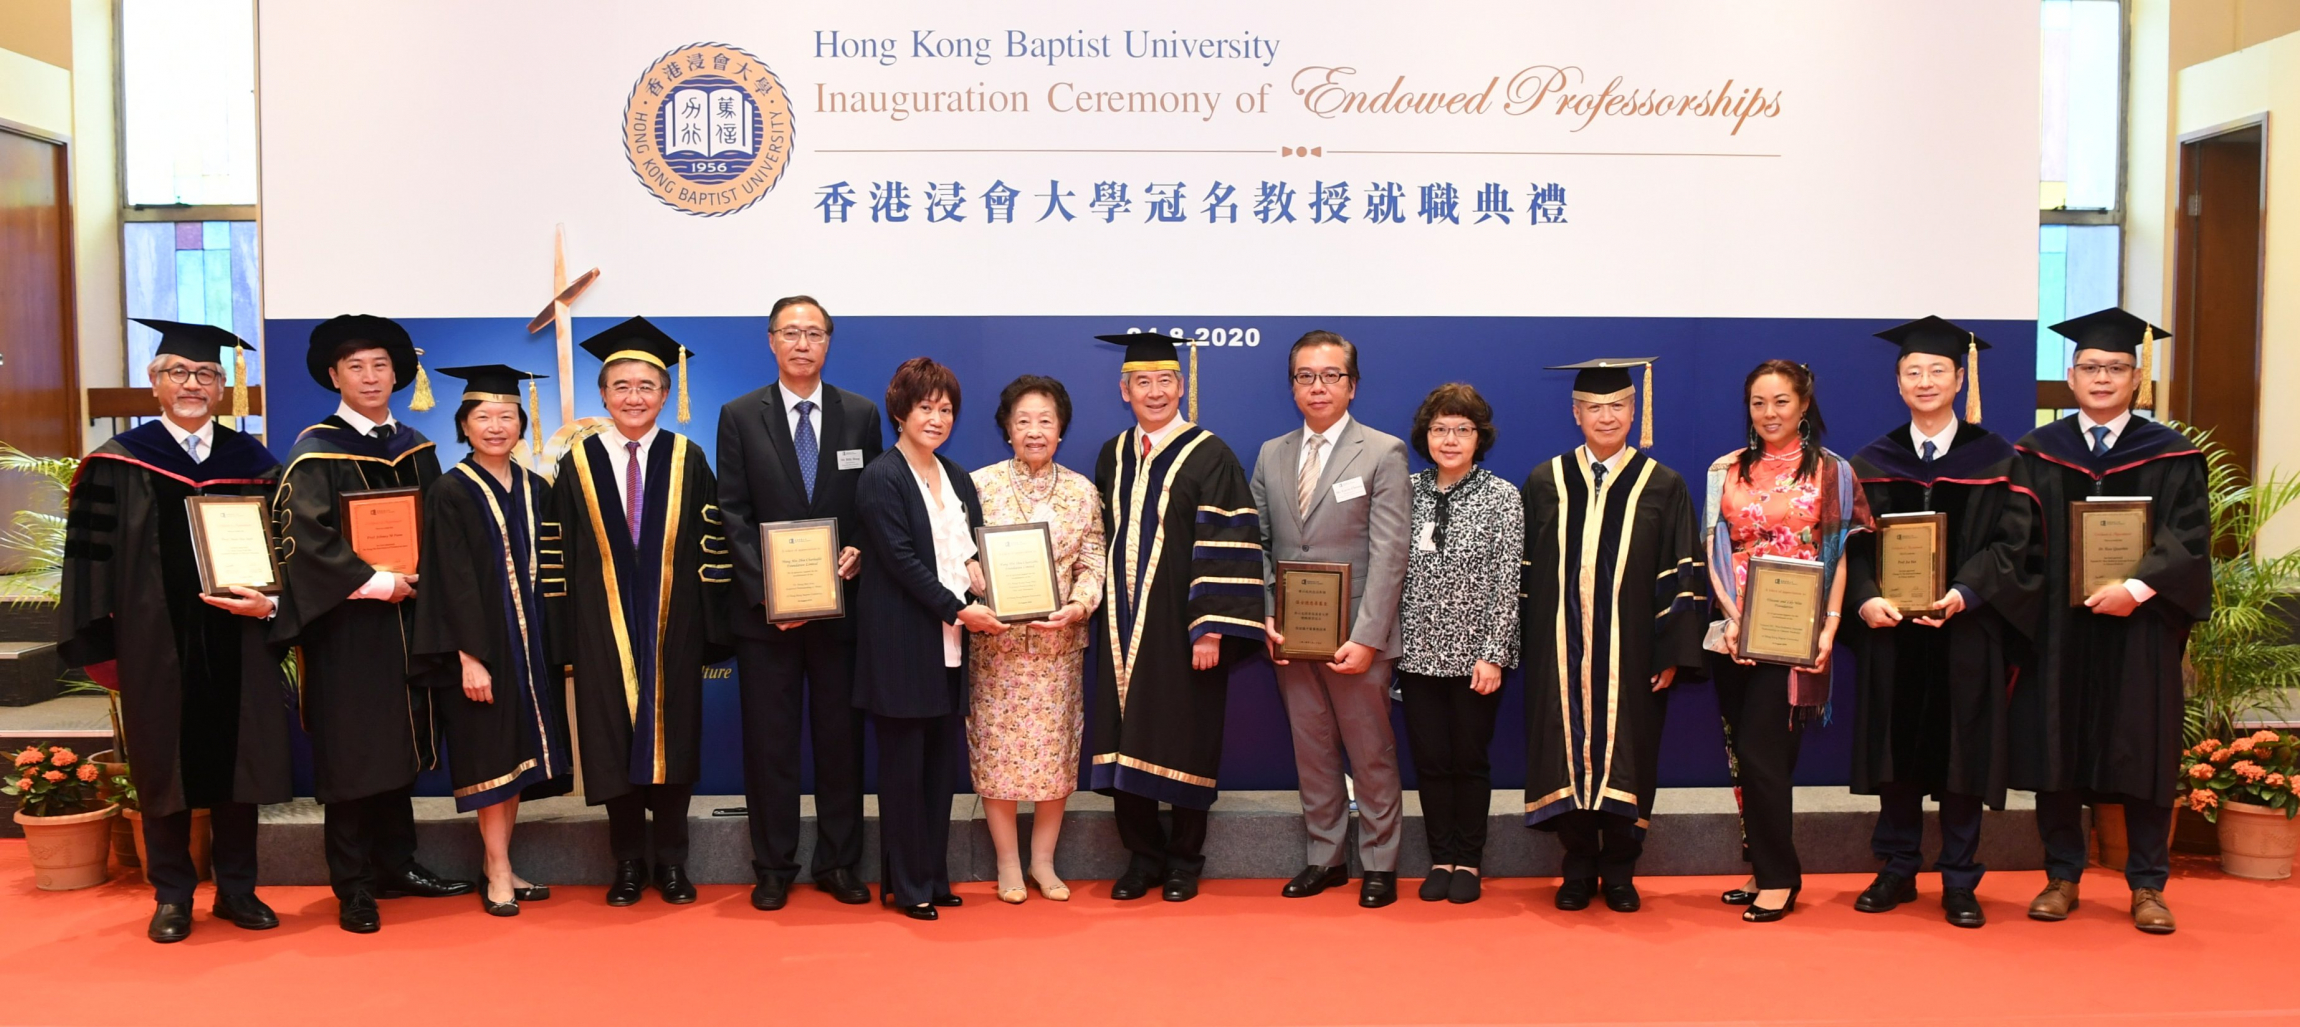 (From left) Professor Man Shu-sum, Dr Hung Yeung Pong Wah Endowed Professor in Film and Television; Professor Johnny Poon Ming-lun, Dr Hung Hin Shiu Endowed Professor in Music; Ms Rosanna Choi, Treasurer of the Council and the Court of HKBU; Professor Roland Chin, President and Vice-Chancellor of HKBU; Mr Billy Hung, Ms Elizabeth Hung and Dr Hung Yeung Pong-wah, representatives of Hung Hin Shiu Charitable Foundation Limited; Dr Clement Chen Cheng-jen, Chairman of the Council and the Court of HKBU; Mr Gavin Cheung and Ms Annie Cheung, representatives of Cheung On Tak Charity Foundation; Mr Paul Poon, Deputy Chairman of the Council and the Court of HKBU; Ms Cindy Wu, representative of Vincent and Lily Woo Foundation; Professor Jia Wei, Cheung On Tak Endowed Professor in Chinese Medicine; and Dr Han Quanbin, Vincent V.C. Woo Endowed Associate Professor in Chinese Medicine